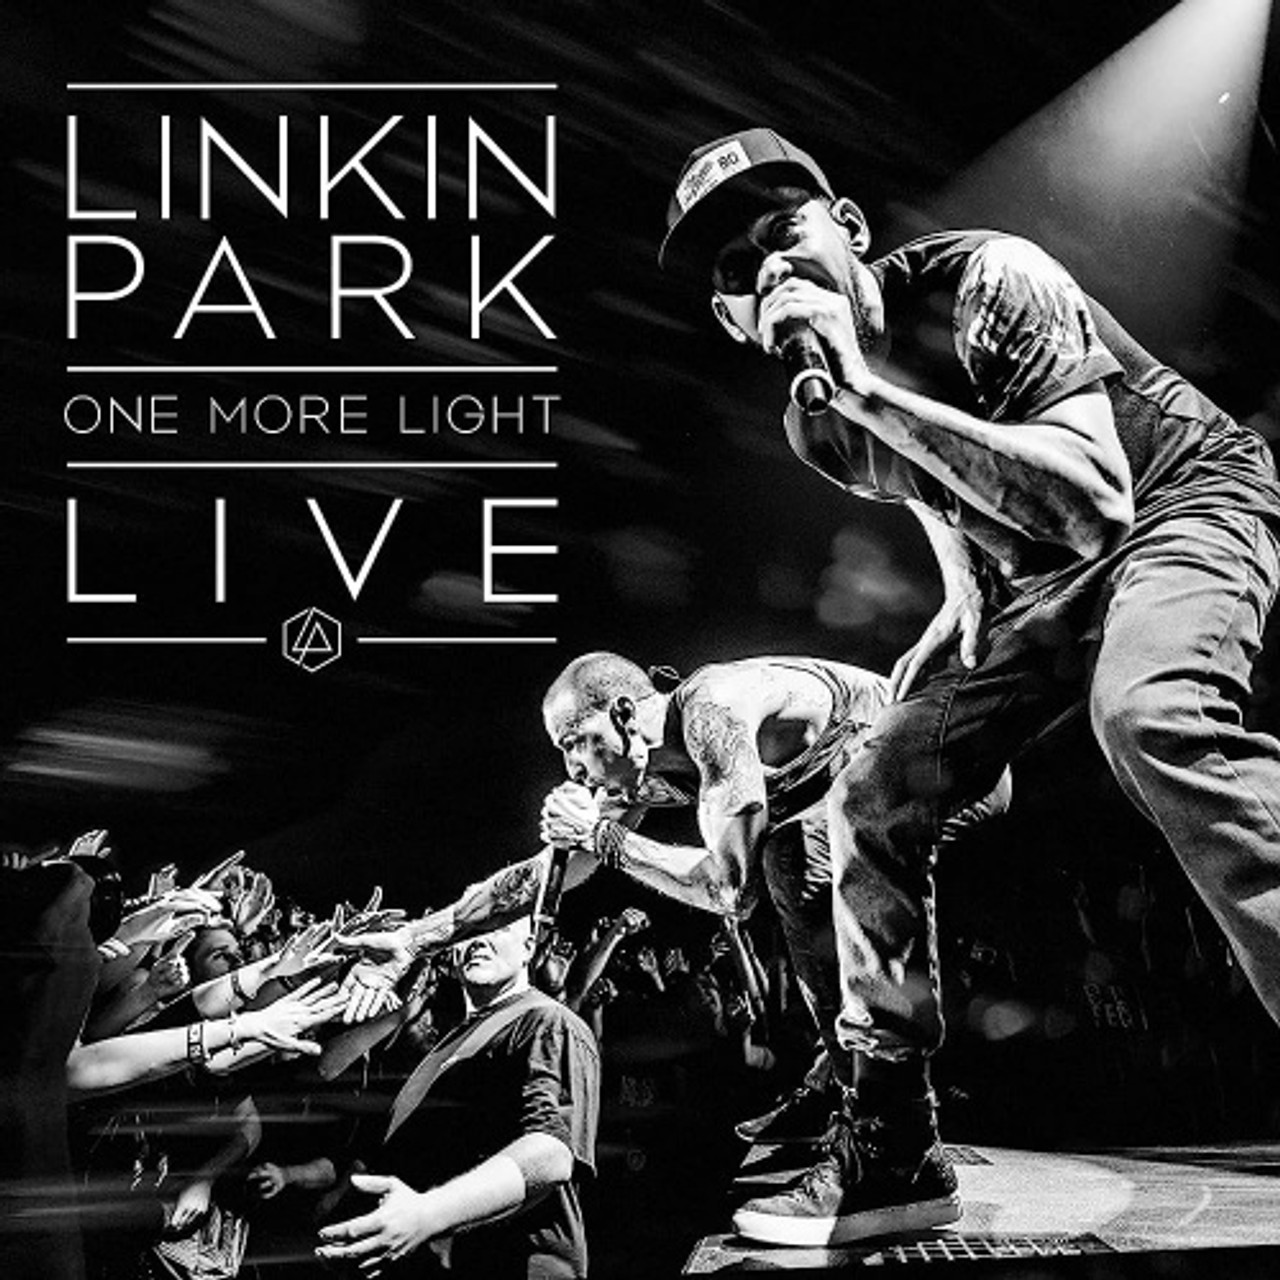 Linkin Park - One More Light Live - 2x LP Colored Vinyl - Ear Candy Music